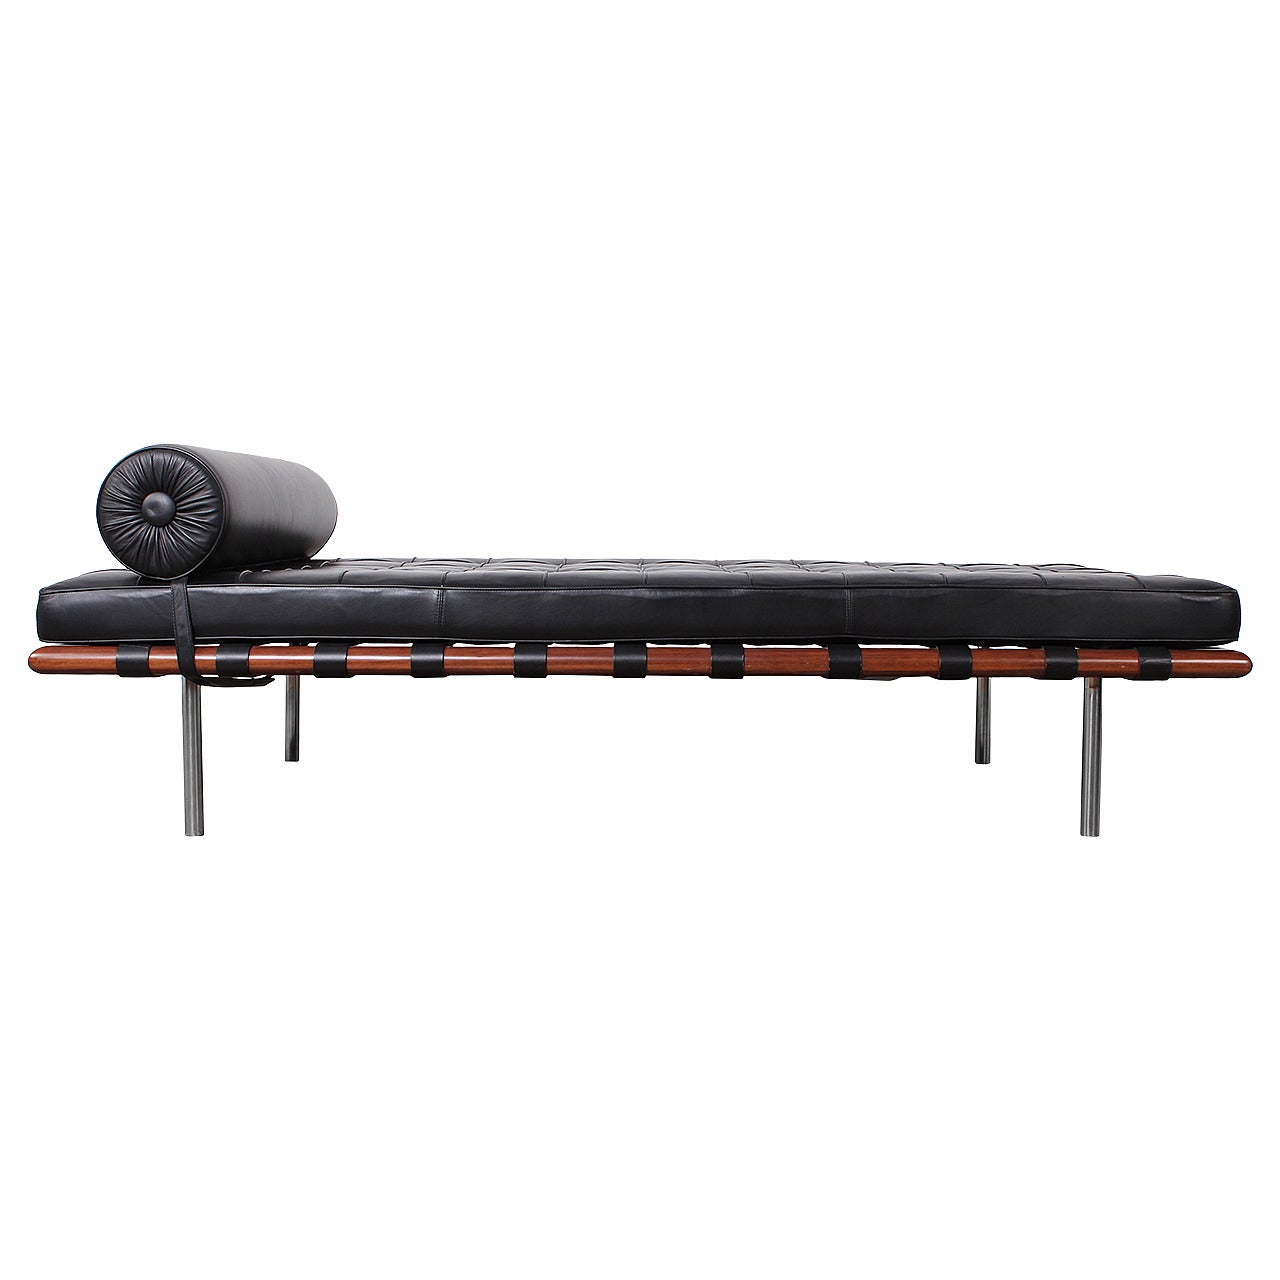 Barcelona Daybed by Mies van der Rohe for Knoll